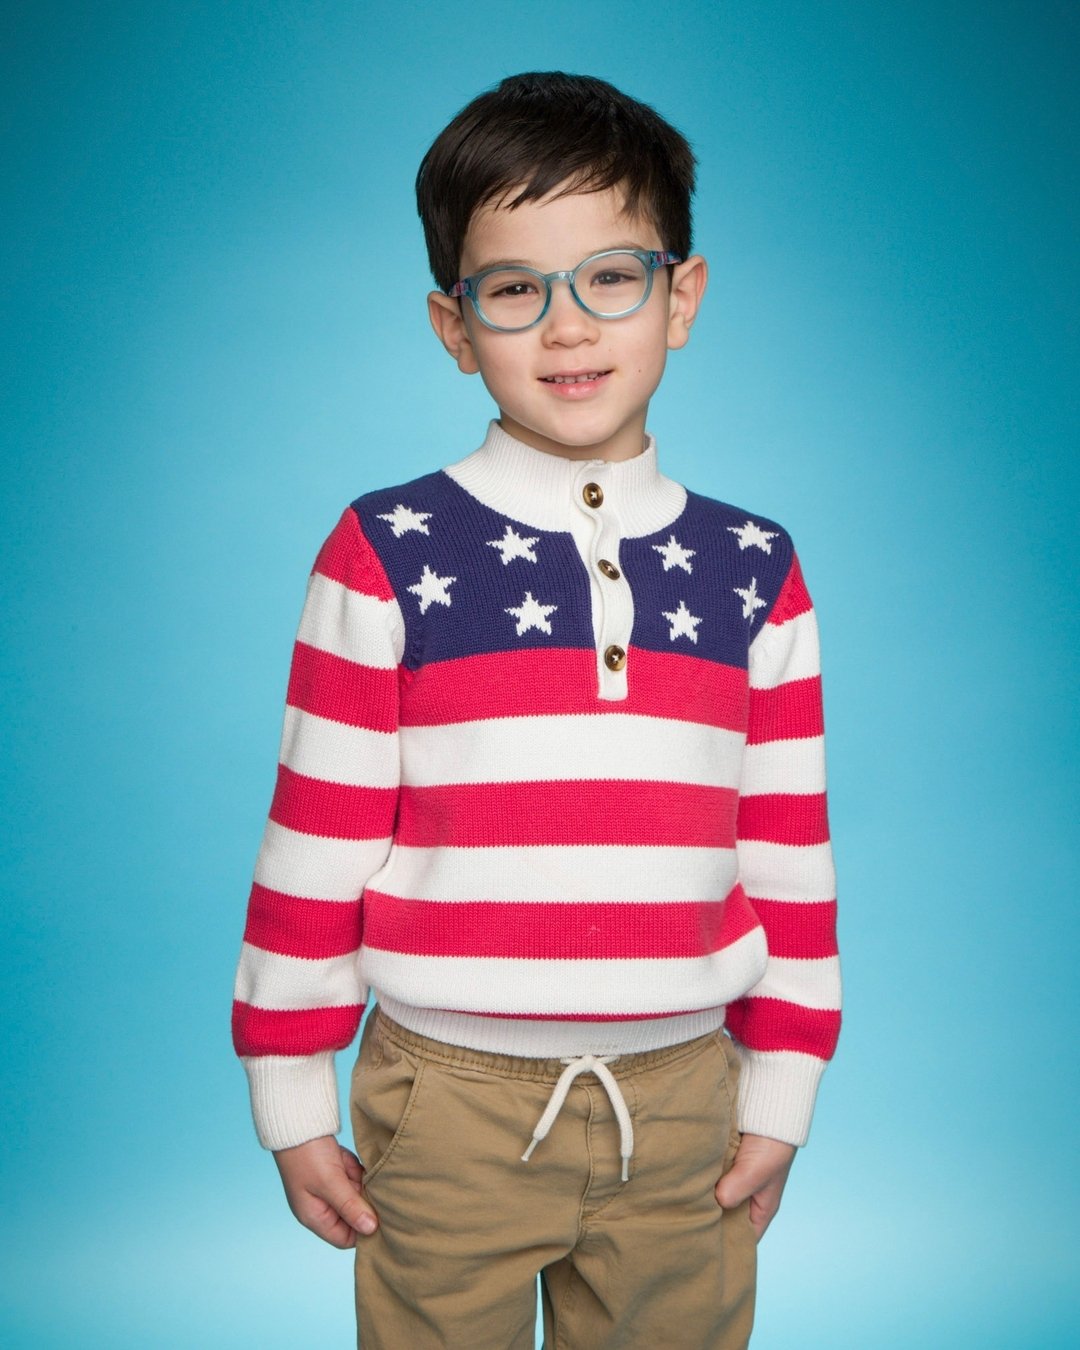 Red, white, and blue vibes all the way! Wishing you a Memorial Day filled with reverence and gratitude!
 🎆 🇺🇸 🌟

#RedWhiteBlue #MemorialDayCelebration #MemorialDayHeroes 

@Ajhongkuehn 

#schoolpictures2024 #schoolpics #schoolpictures #earlybird 